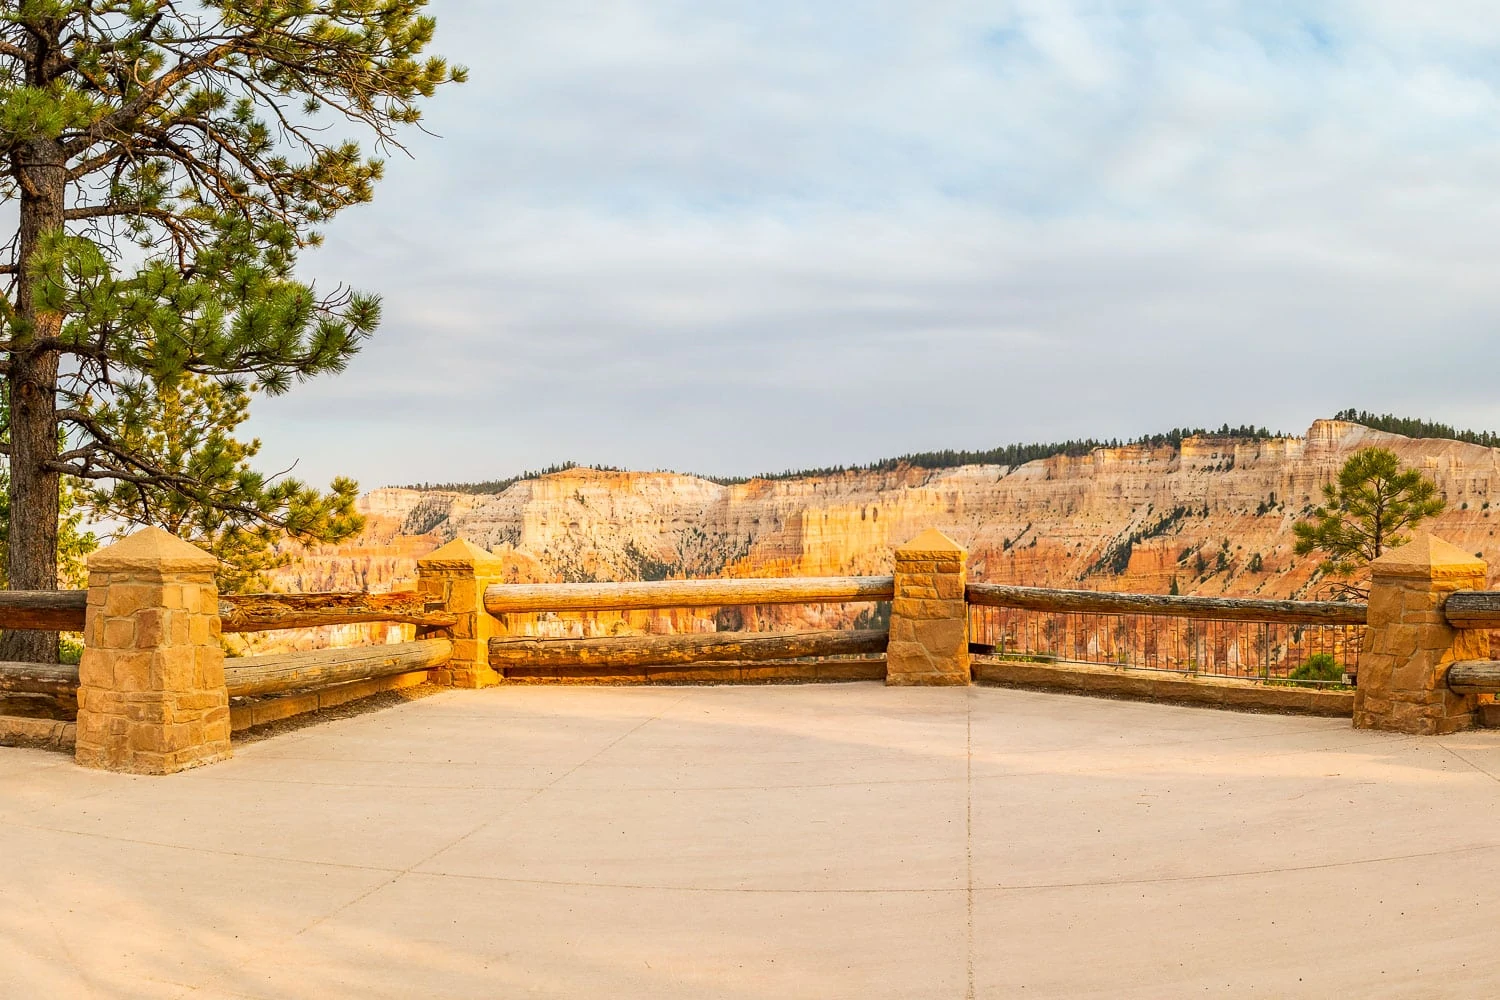 The sunset vista elopement location in Bryce Canyon National Park.